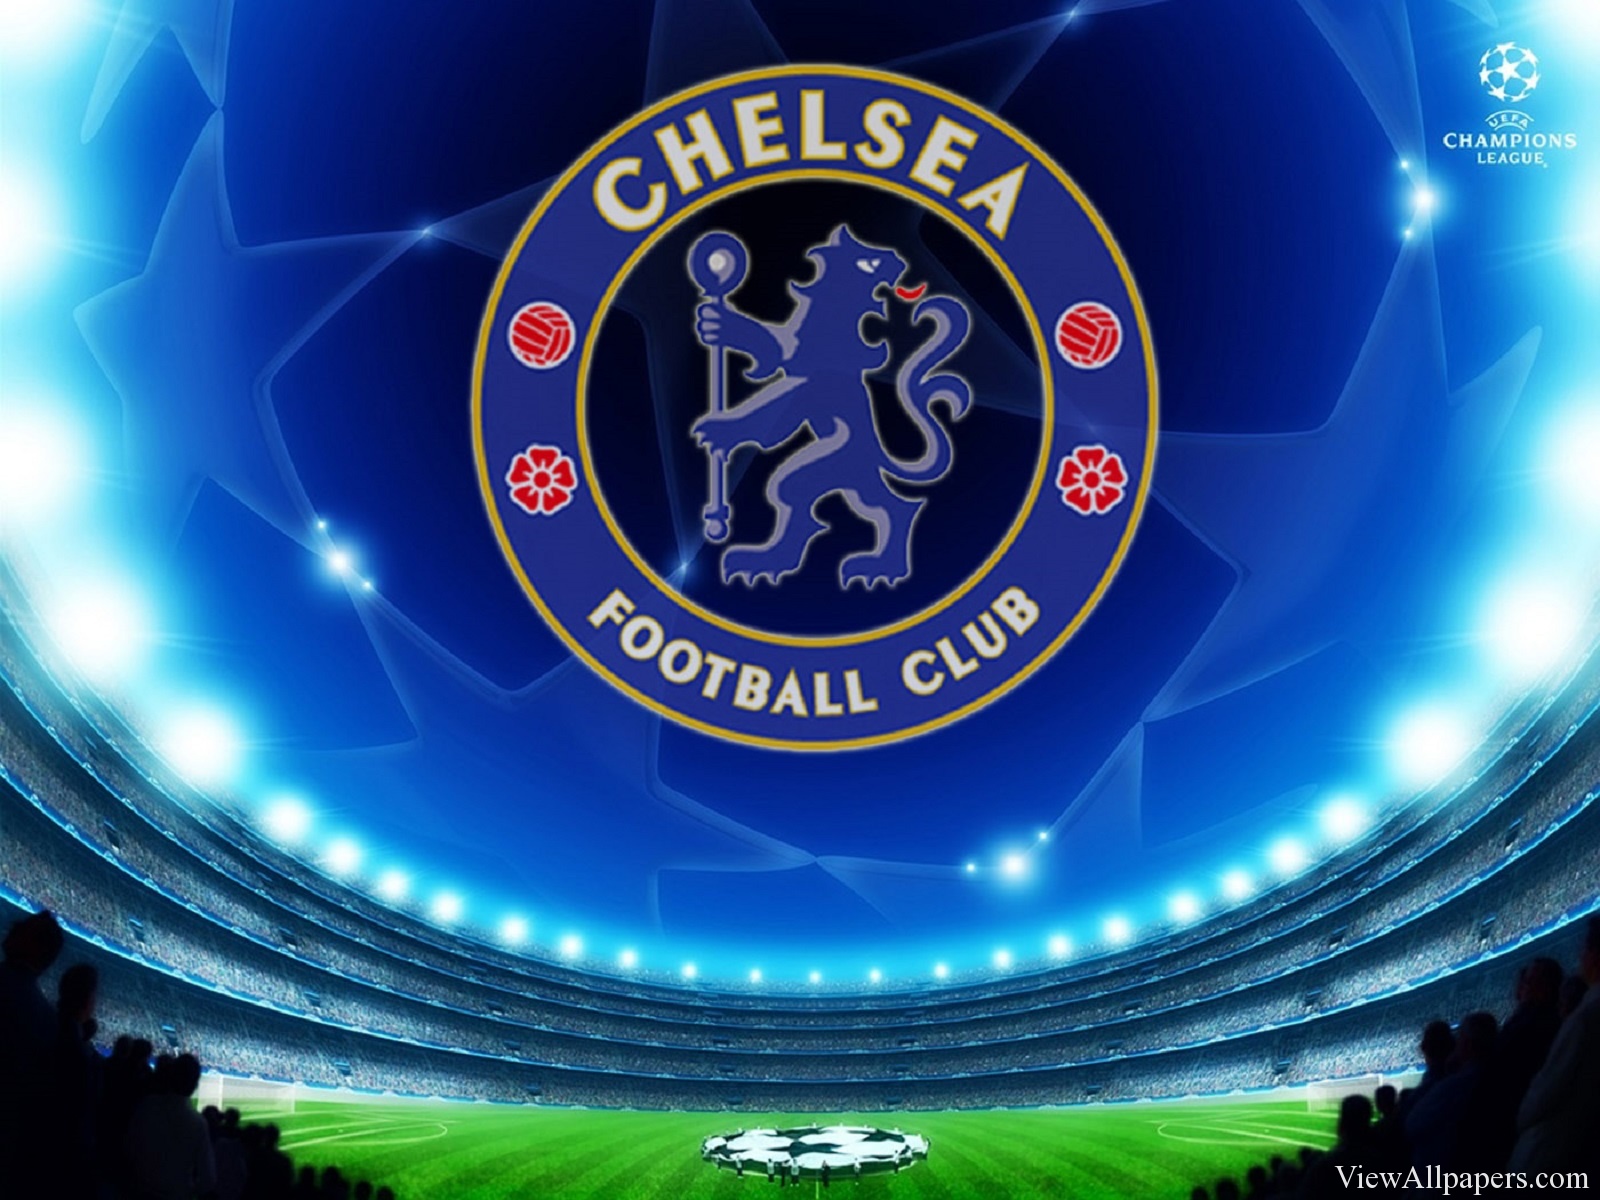 Chelsea FC Wallpaper High Resolution download Chelsea FC 1600x1200